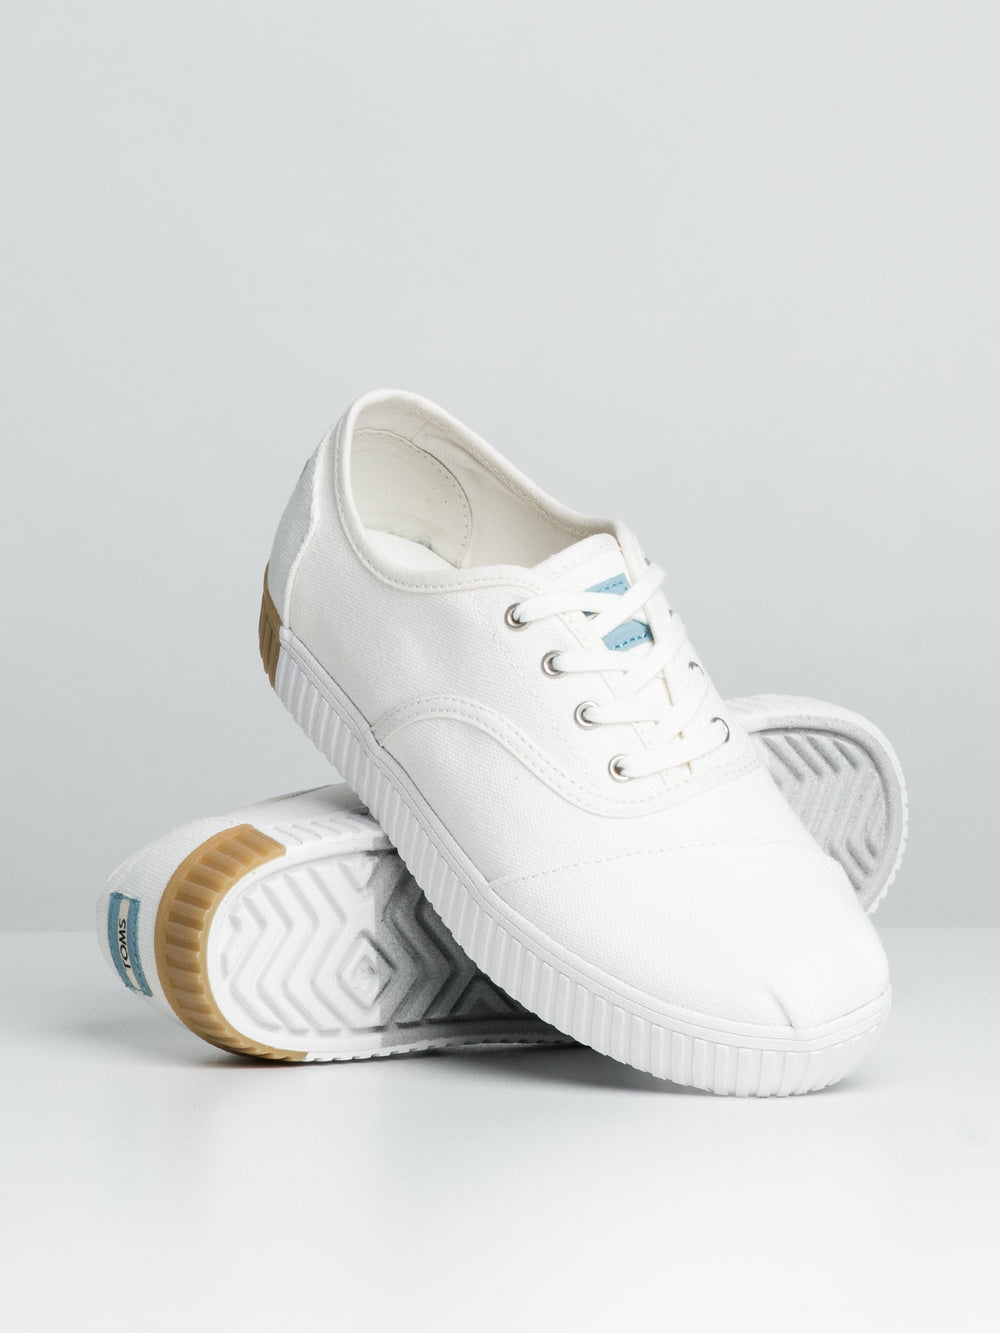 WOMENS CORCONES INDIO SNEAKER - CLEARANCE